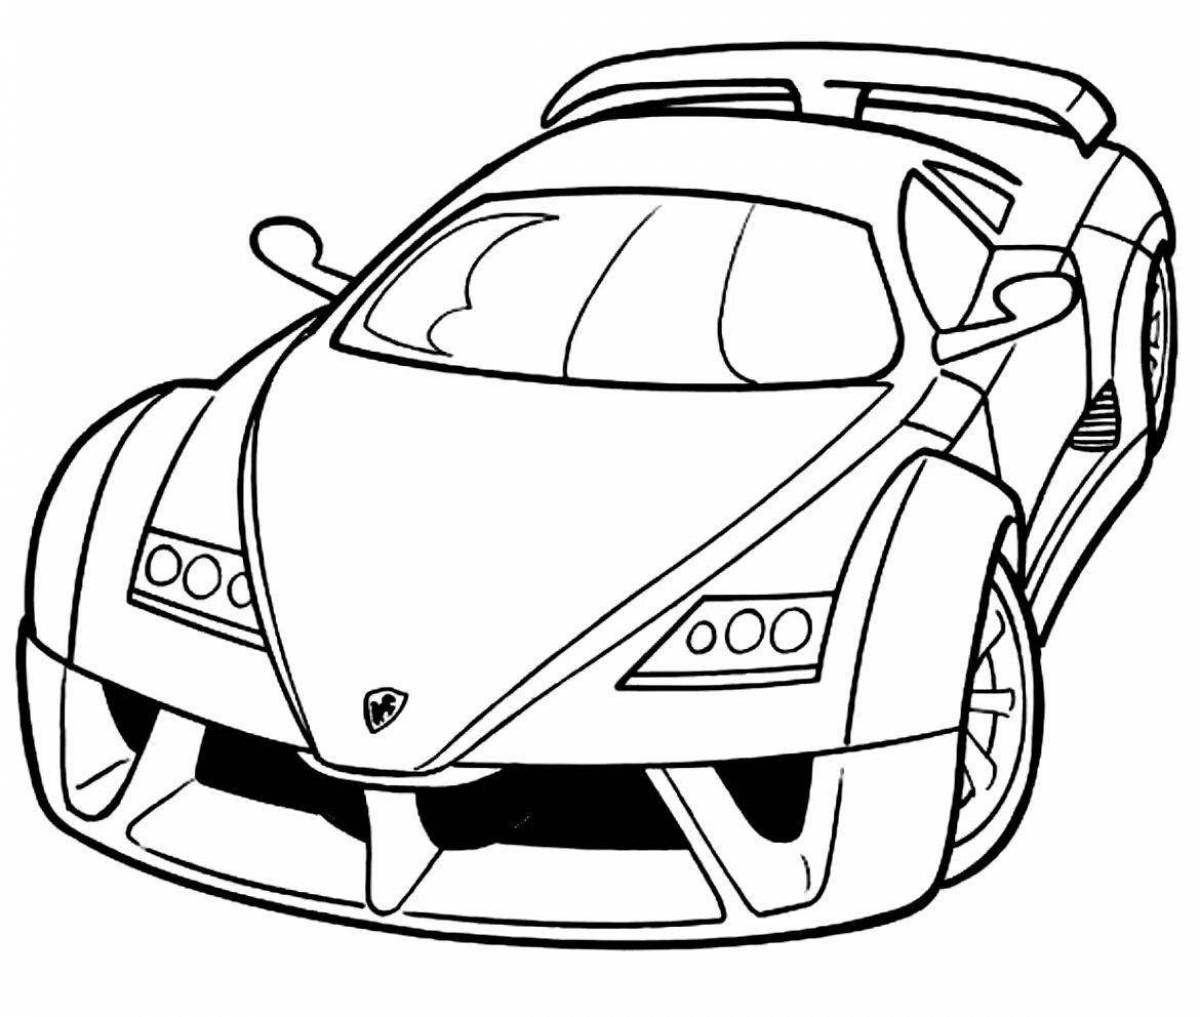 Amazing car games for boys coloring book